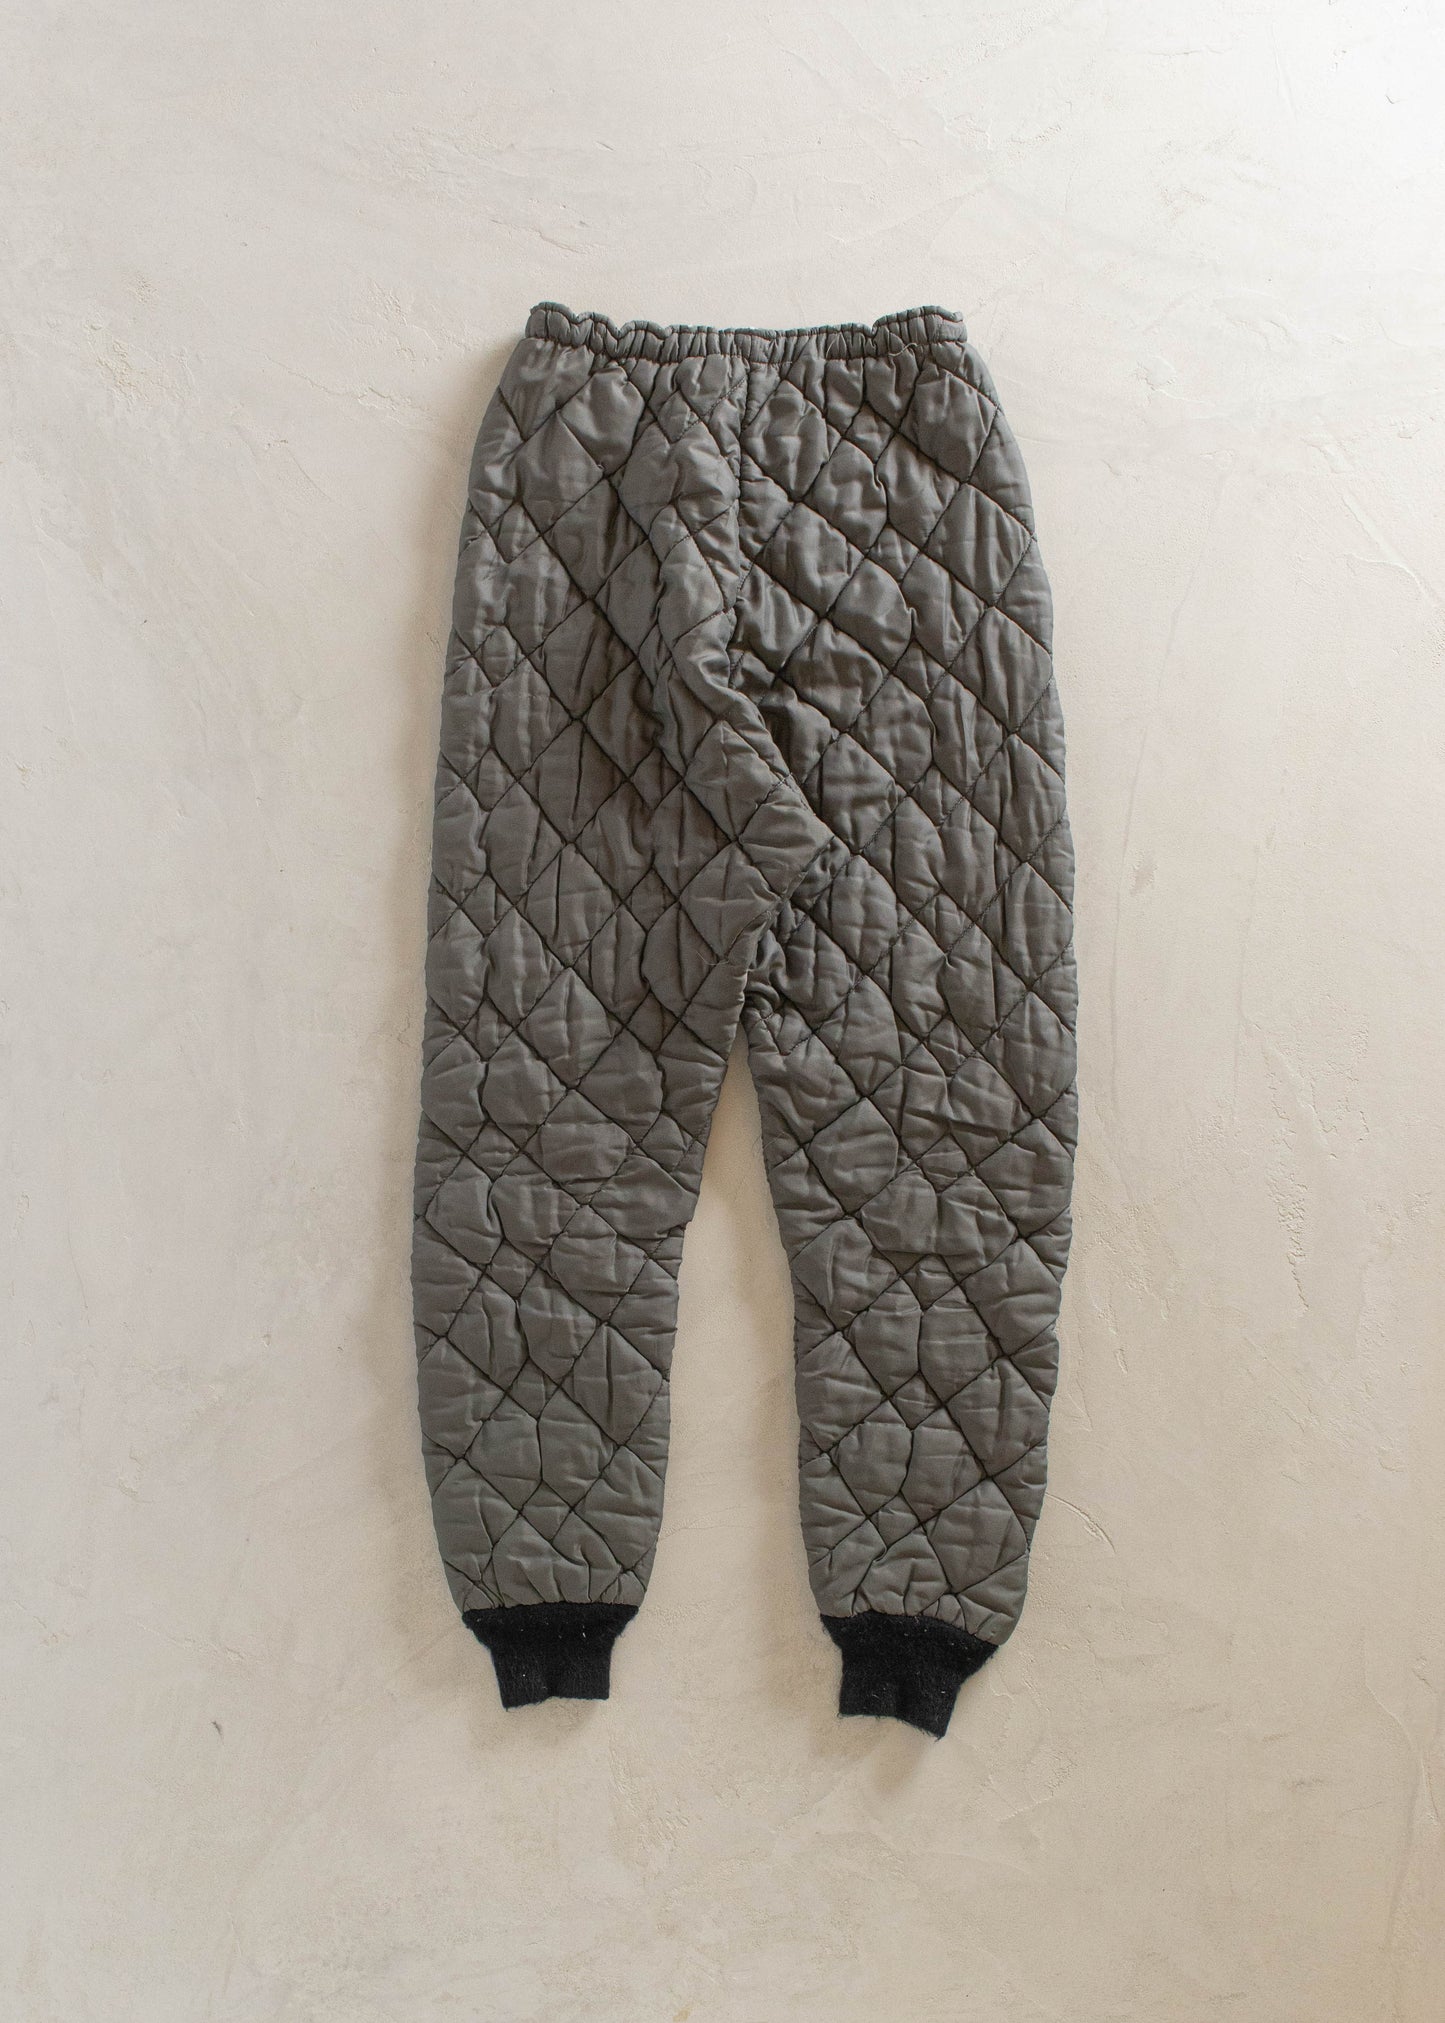 1980s Thermal Lined Quilted Liner Pants Size S/M